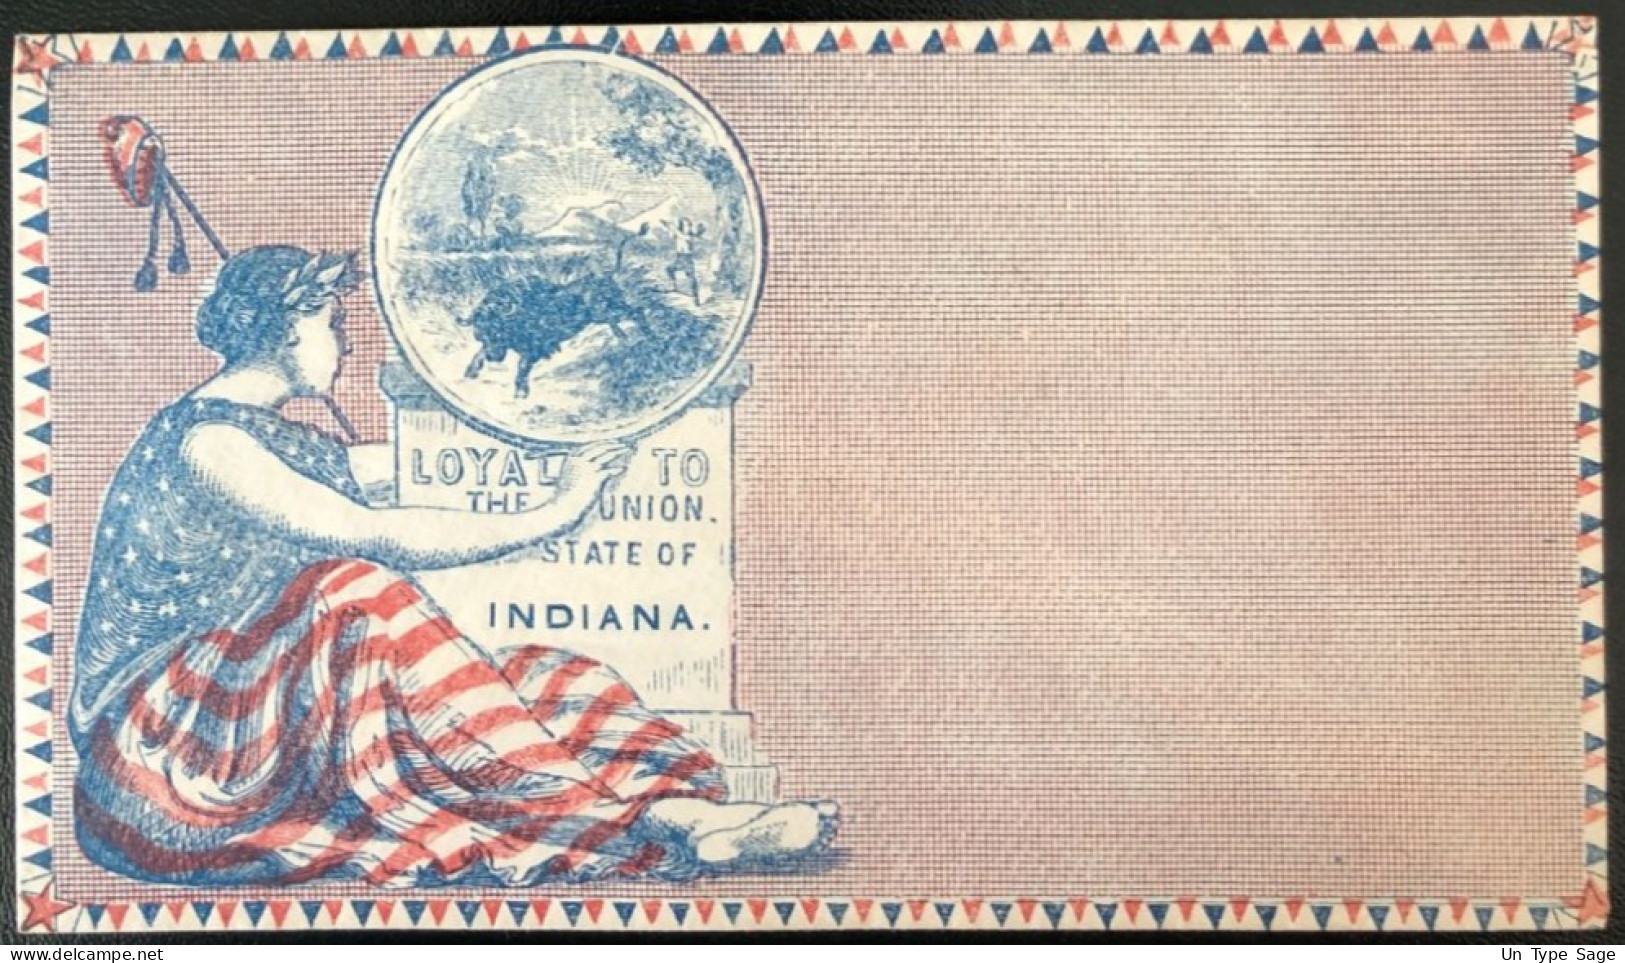 U.S.A, Civil War, Patriotic Cover - "Loyal To The Union. State Of INDIANA" - Unused - (C457) - Marcophilie